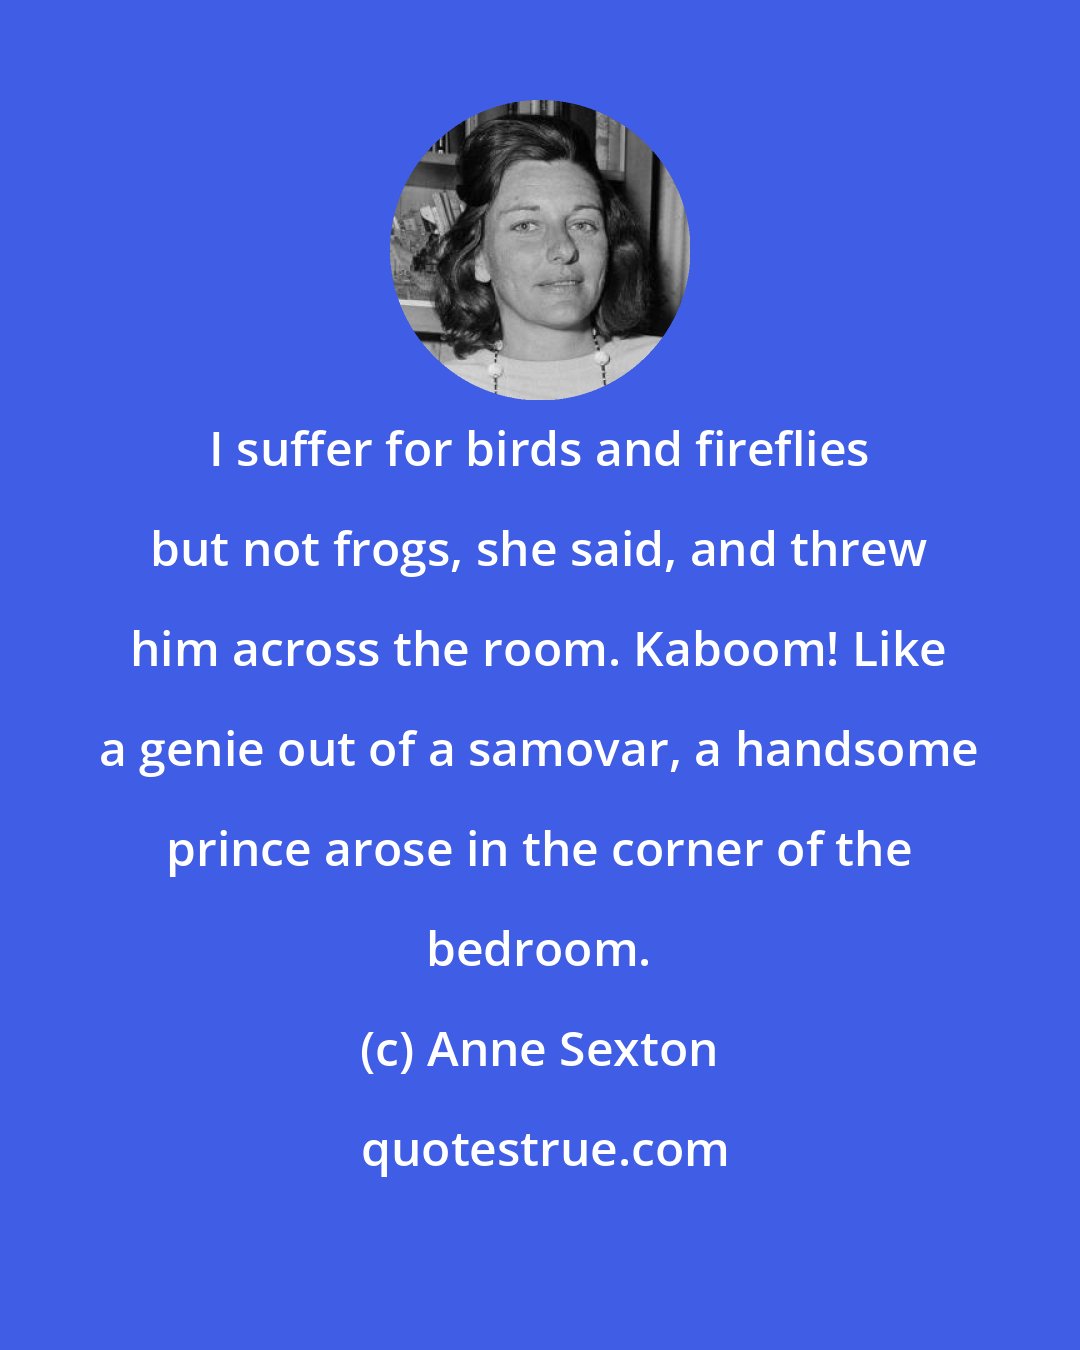 Anne Sexton: I suffer for birds and fireflies but not frogs, she said, and threw him across the room. Kaboom! Like a genie out of a samovar, a handsome prince arose in the corner of the bedroom.